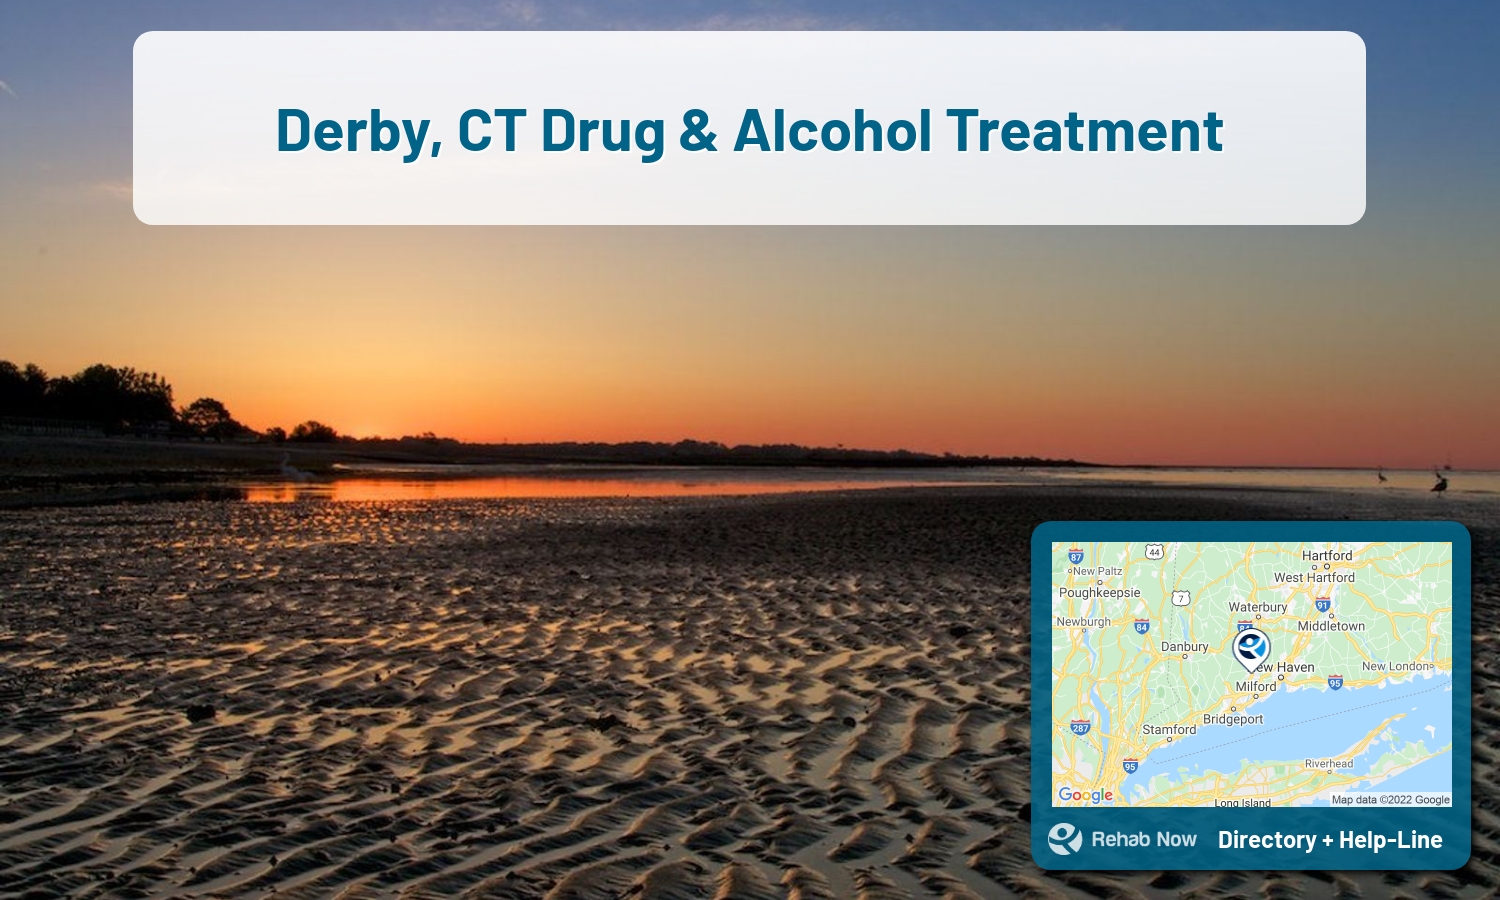 Our experts can help you find treatment now in Derby, Connecticut. We list drug rehab and alcohol centers in Connecticut.